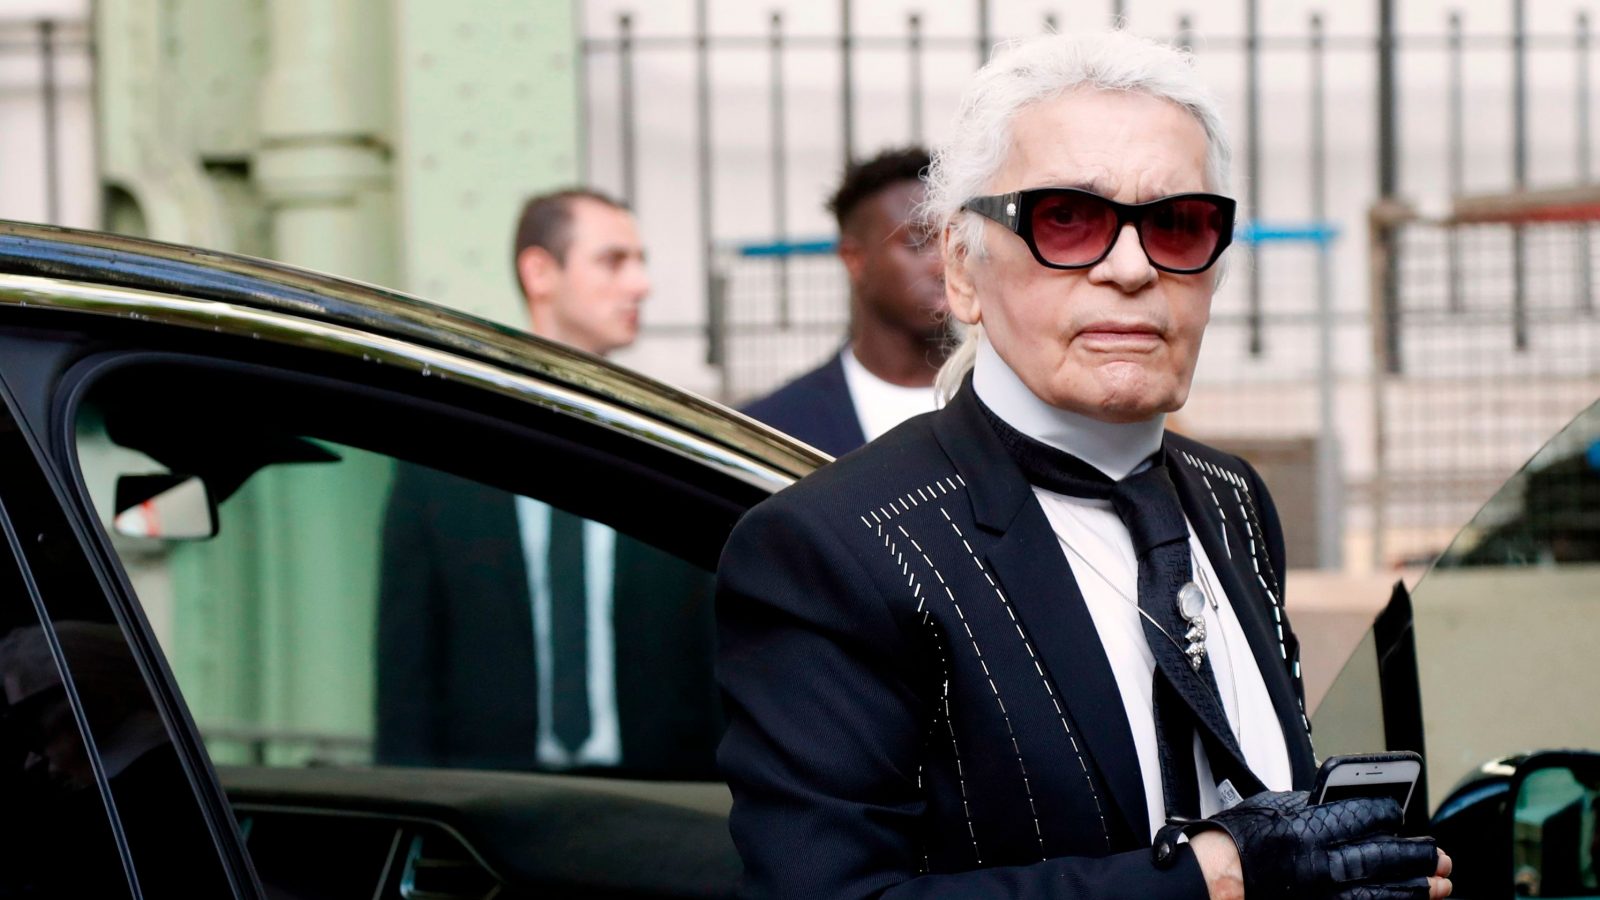 Karl Lagerfeld Makes India Appearance - Forbes India